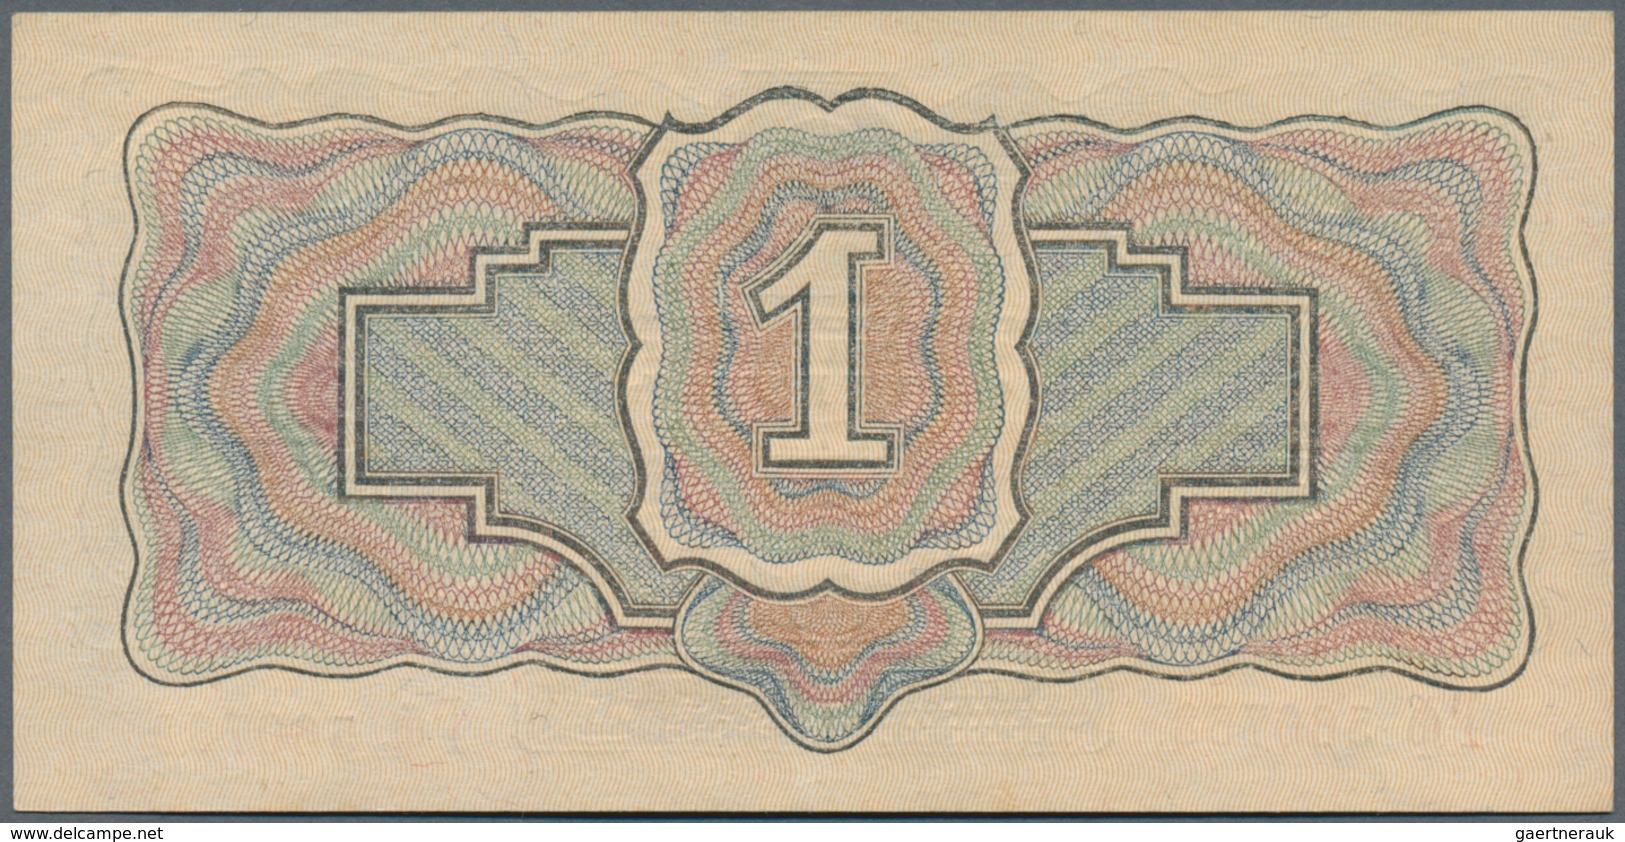 Russia / Russland: Lot with 10 Banknotes comprising 1 Gold Ruble 1928 in F+, 2 x 1, 2 x 3 and 2 x 5